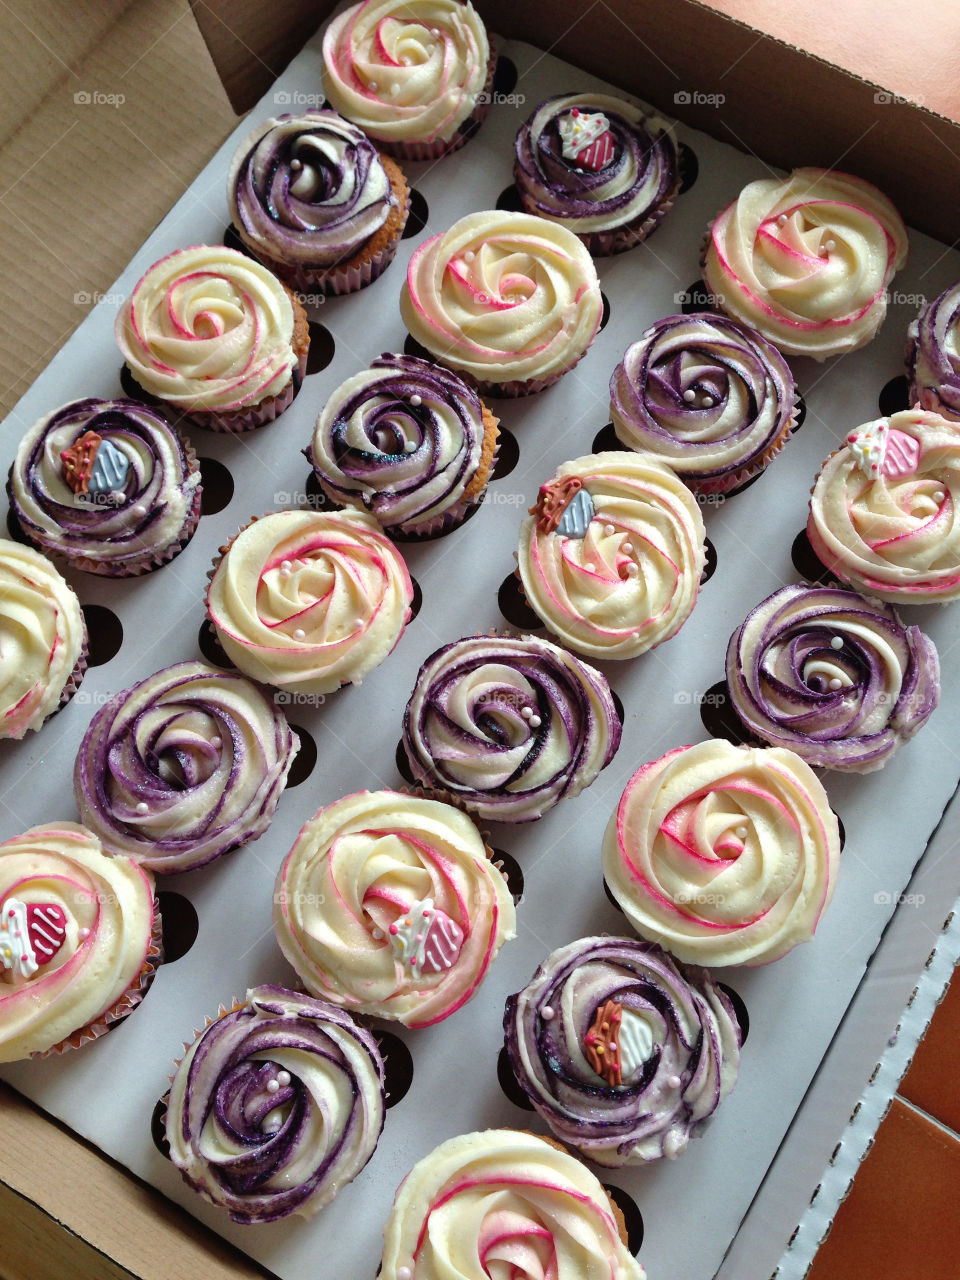 cupcakes buttercream rose by anglauderdale